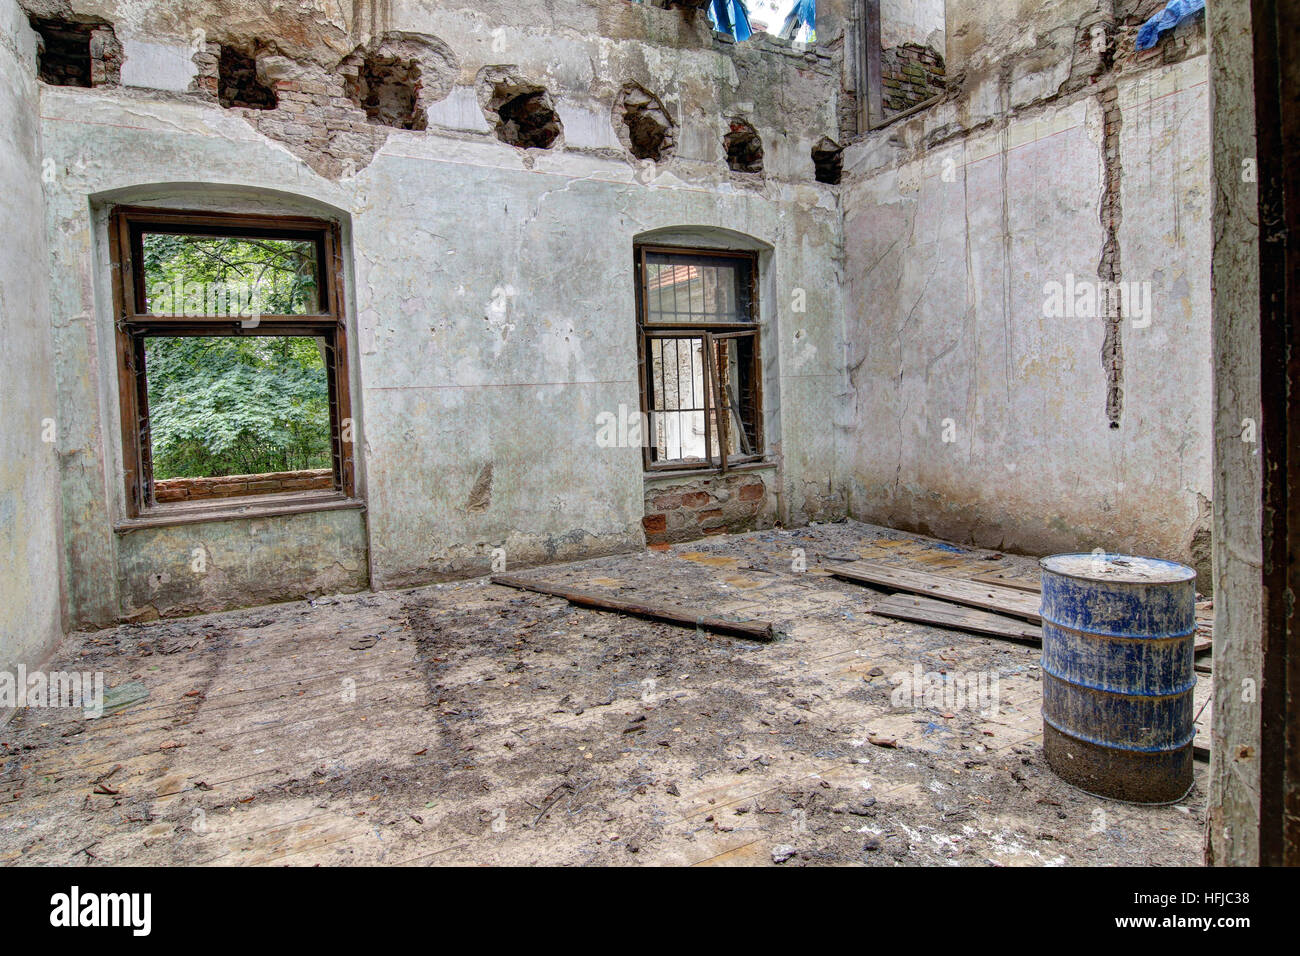 Ruins of building in dilapidated condition Stock Photo